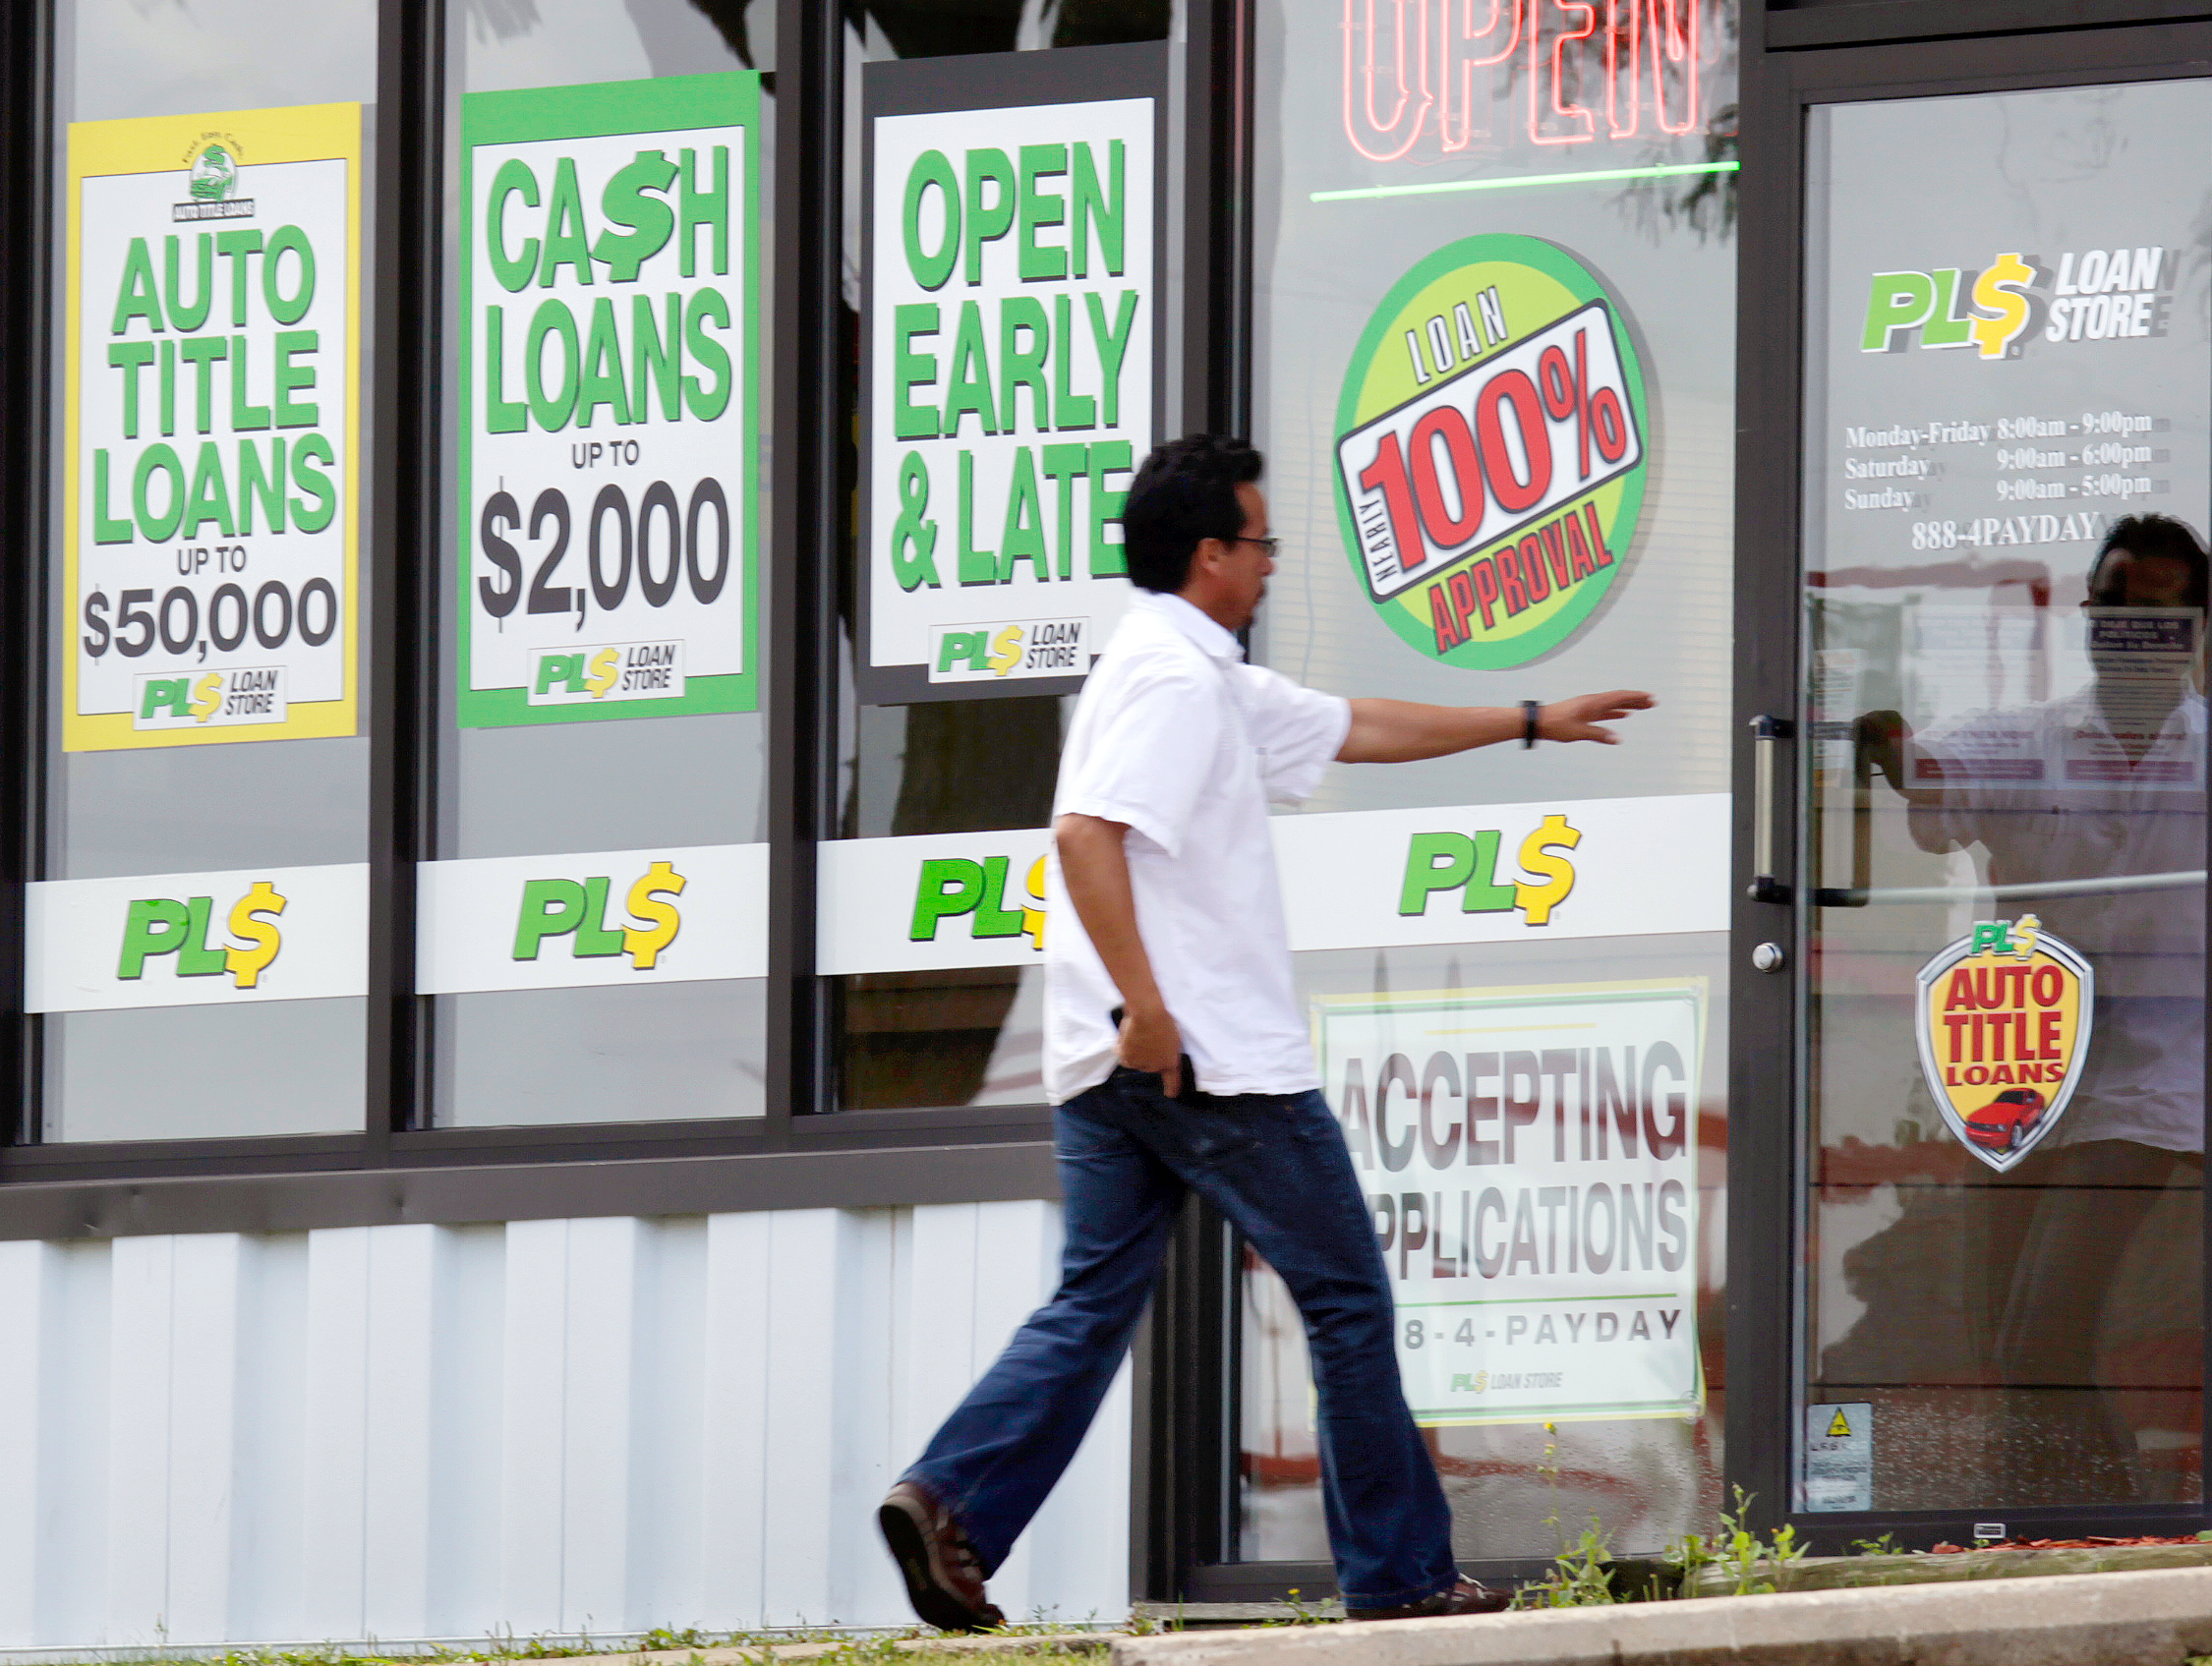 No Relief From Wisconsin’s 565-Percent Payday Loan Interest Under New Rules